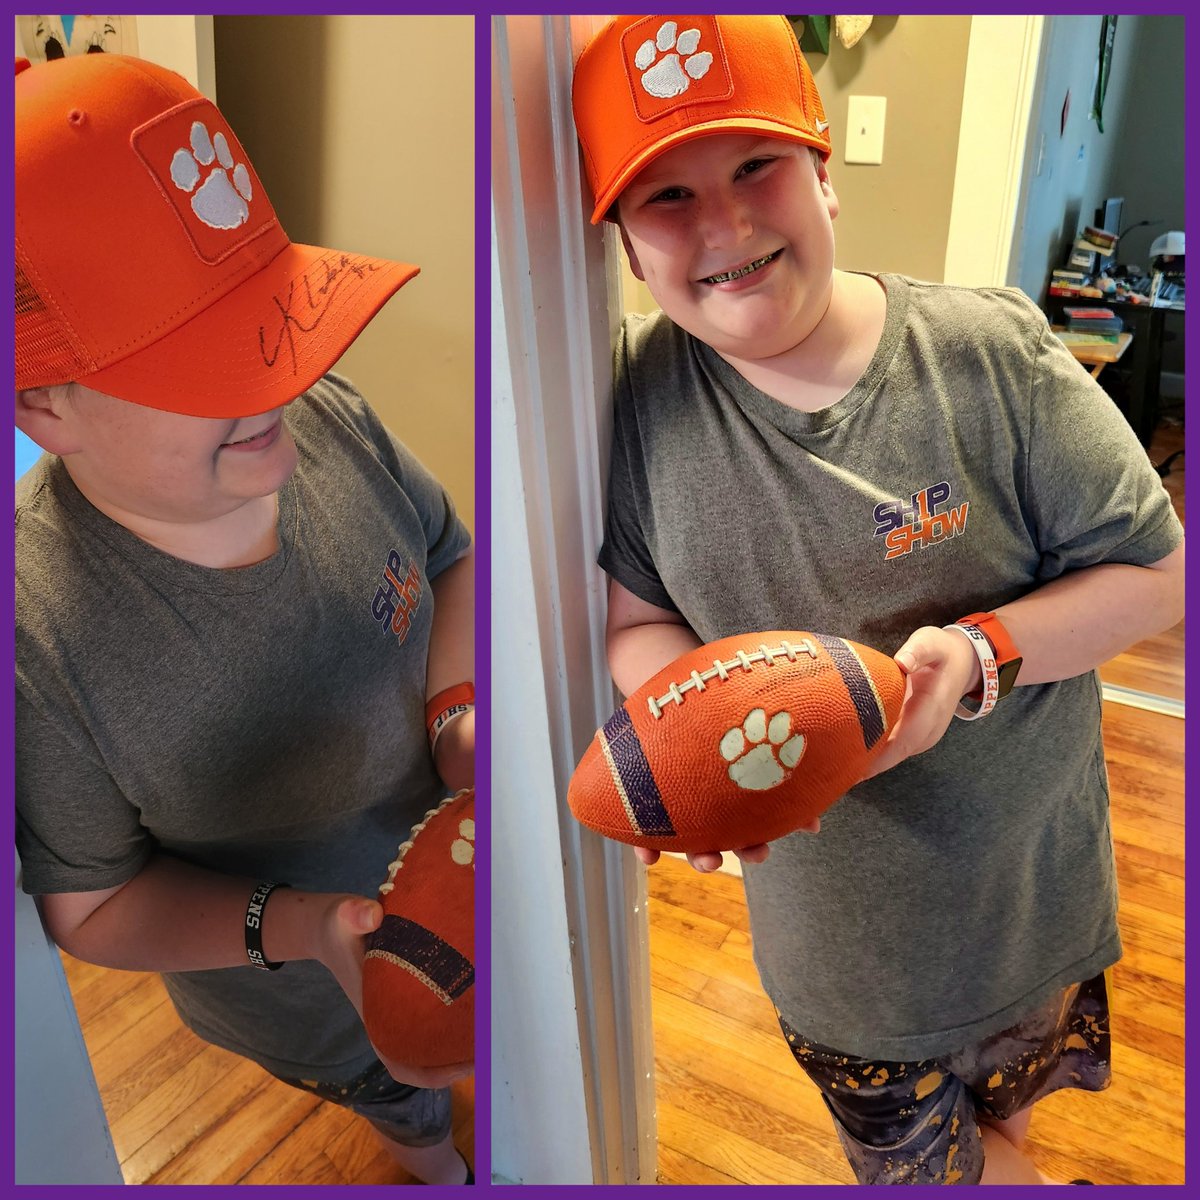 Thanks to @thepawio and @CadeKlubnikQB for this signed @ClemsonFB hat. My 13 y.o. loves it.